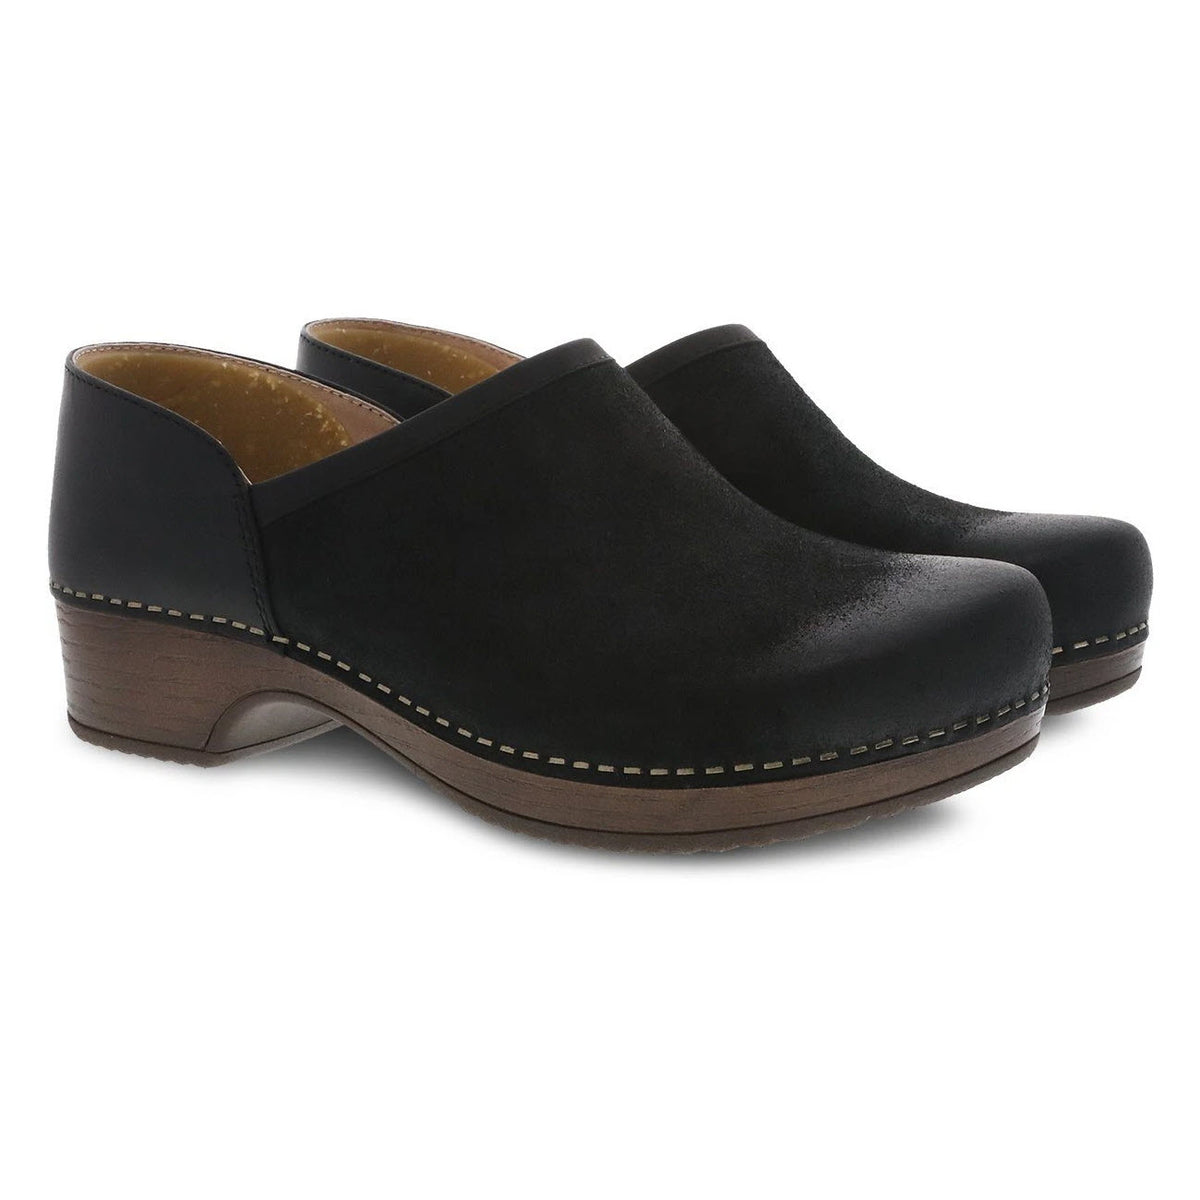 A pair of black Dansko Brenna Black Burnished Suede slip-on clog-style shoes on a white background.